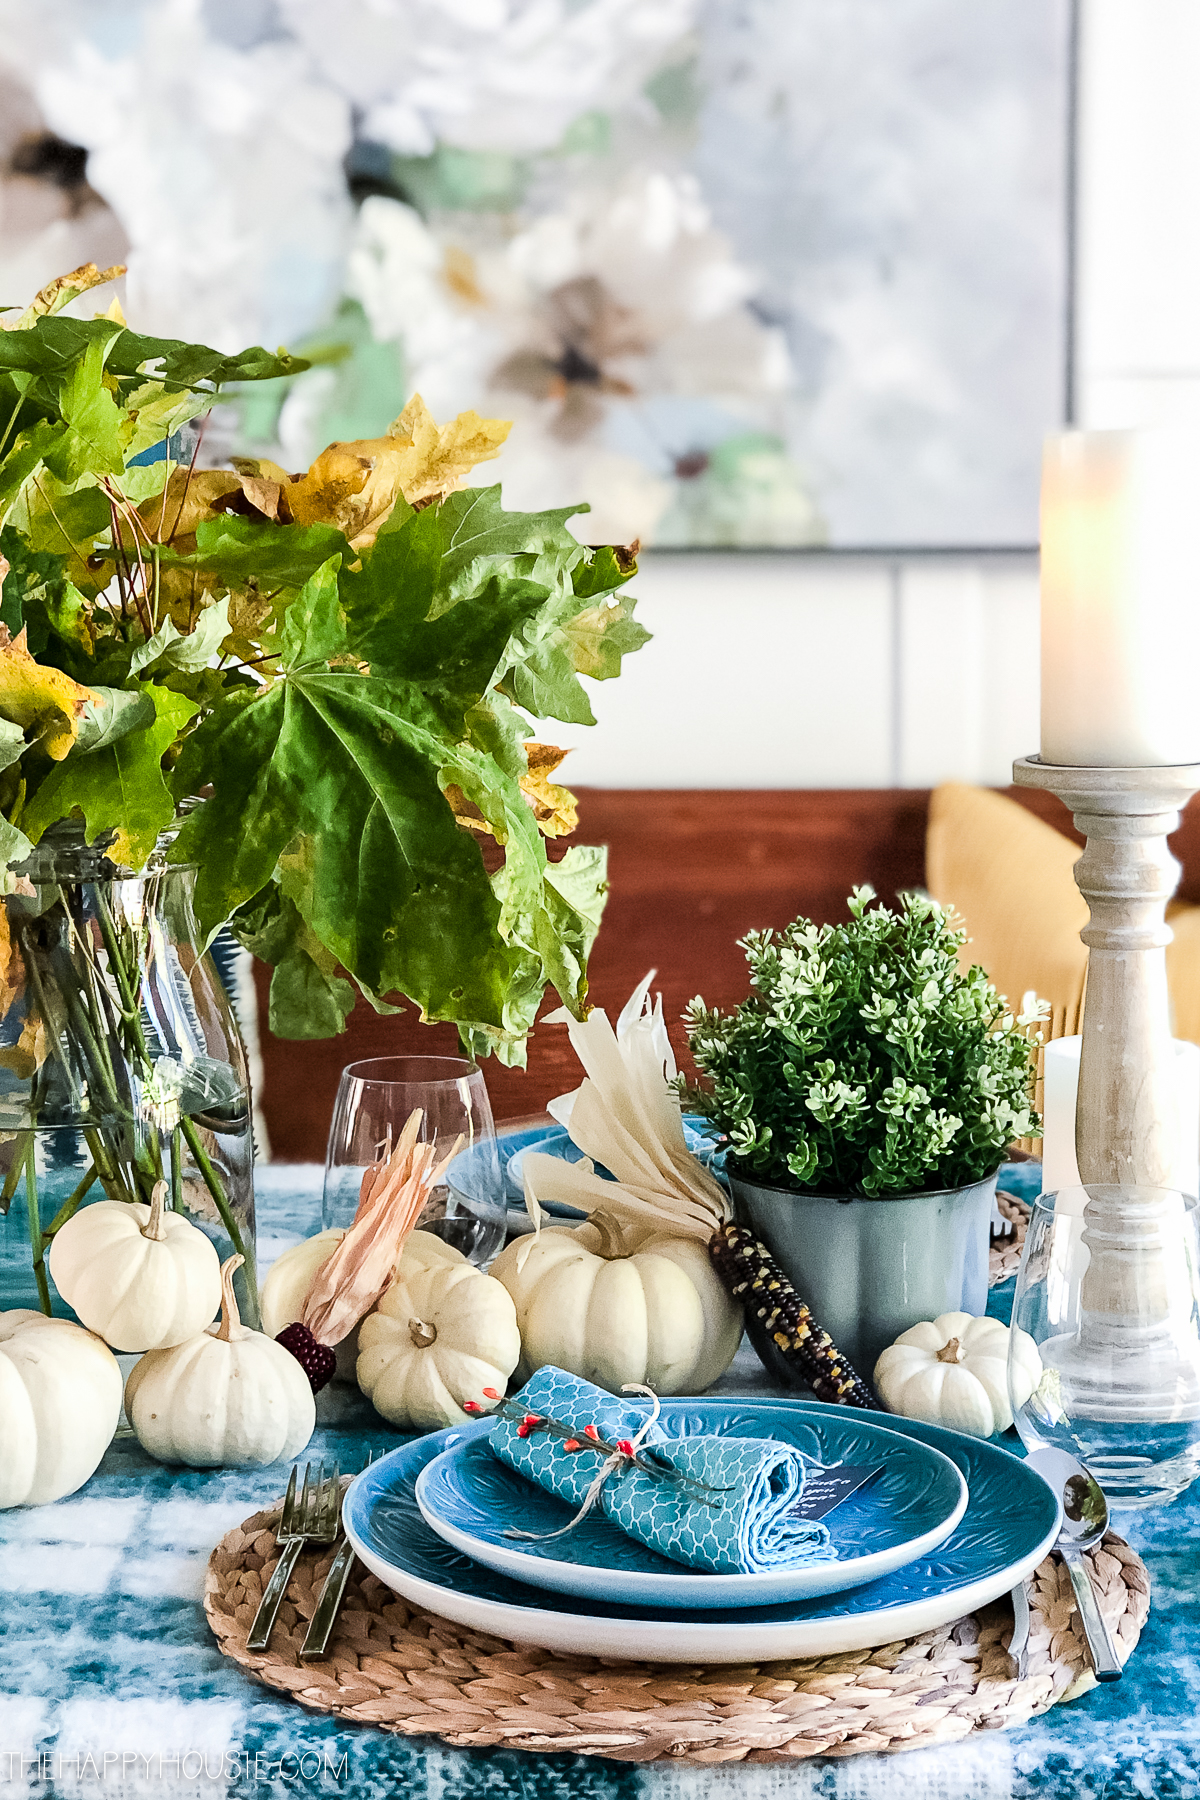 A table setting with blue plates and white mini pumpkins as the centerpiece.